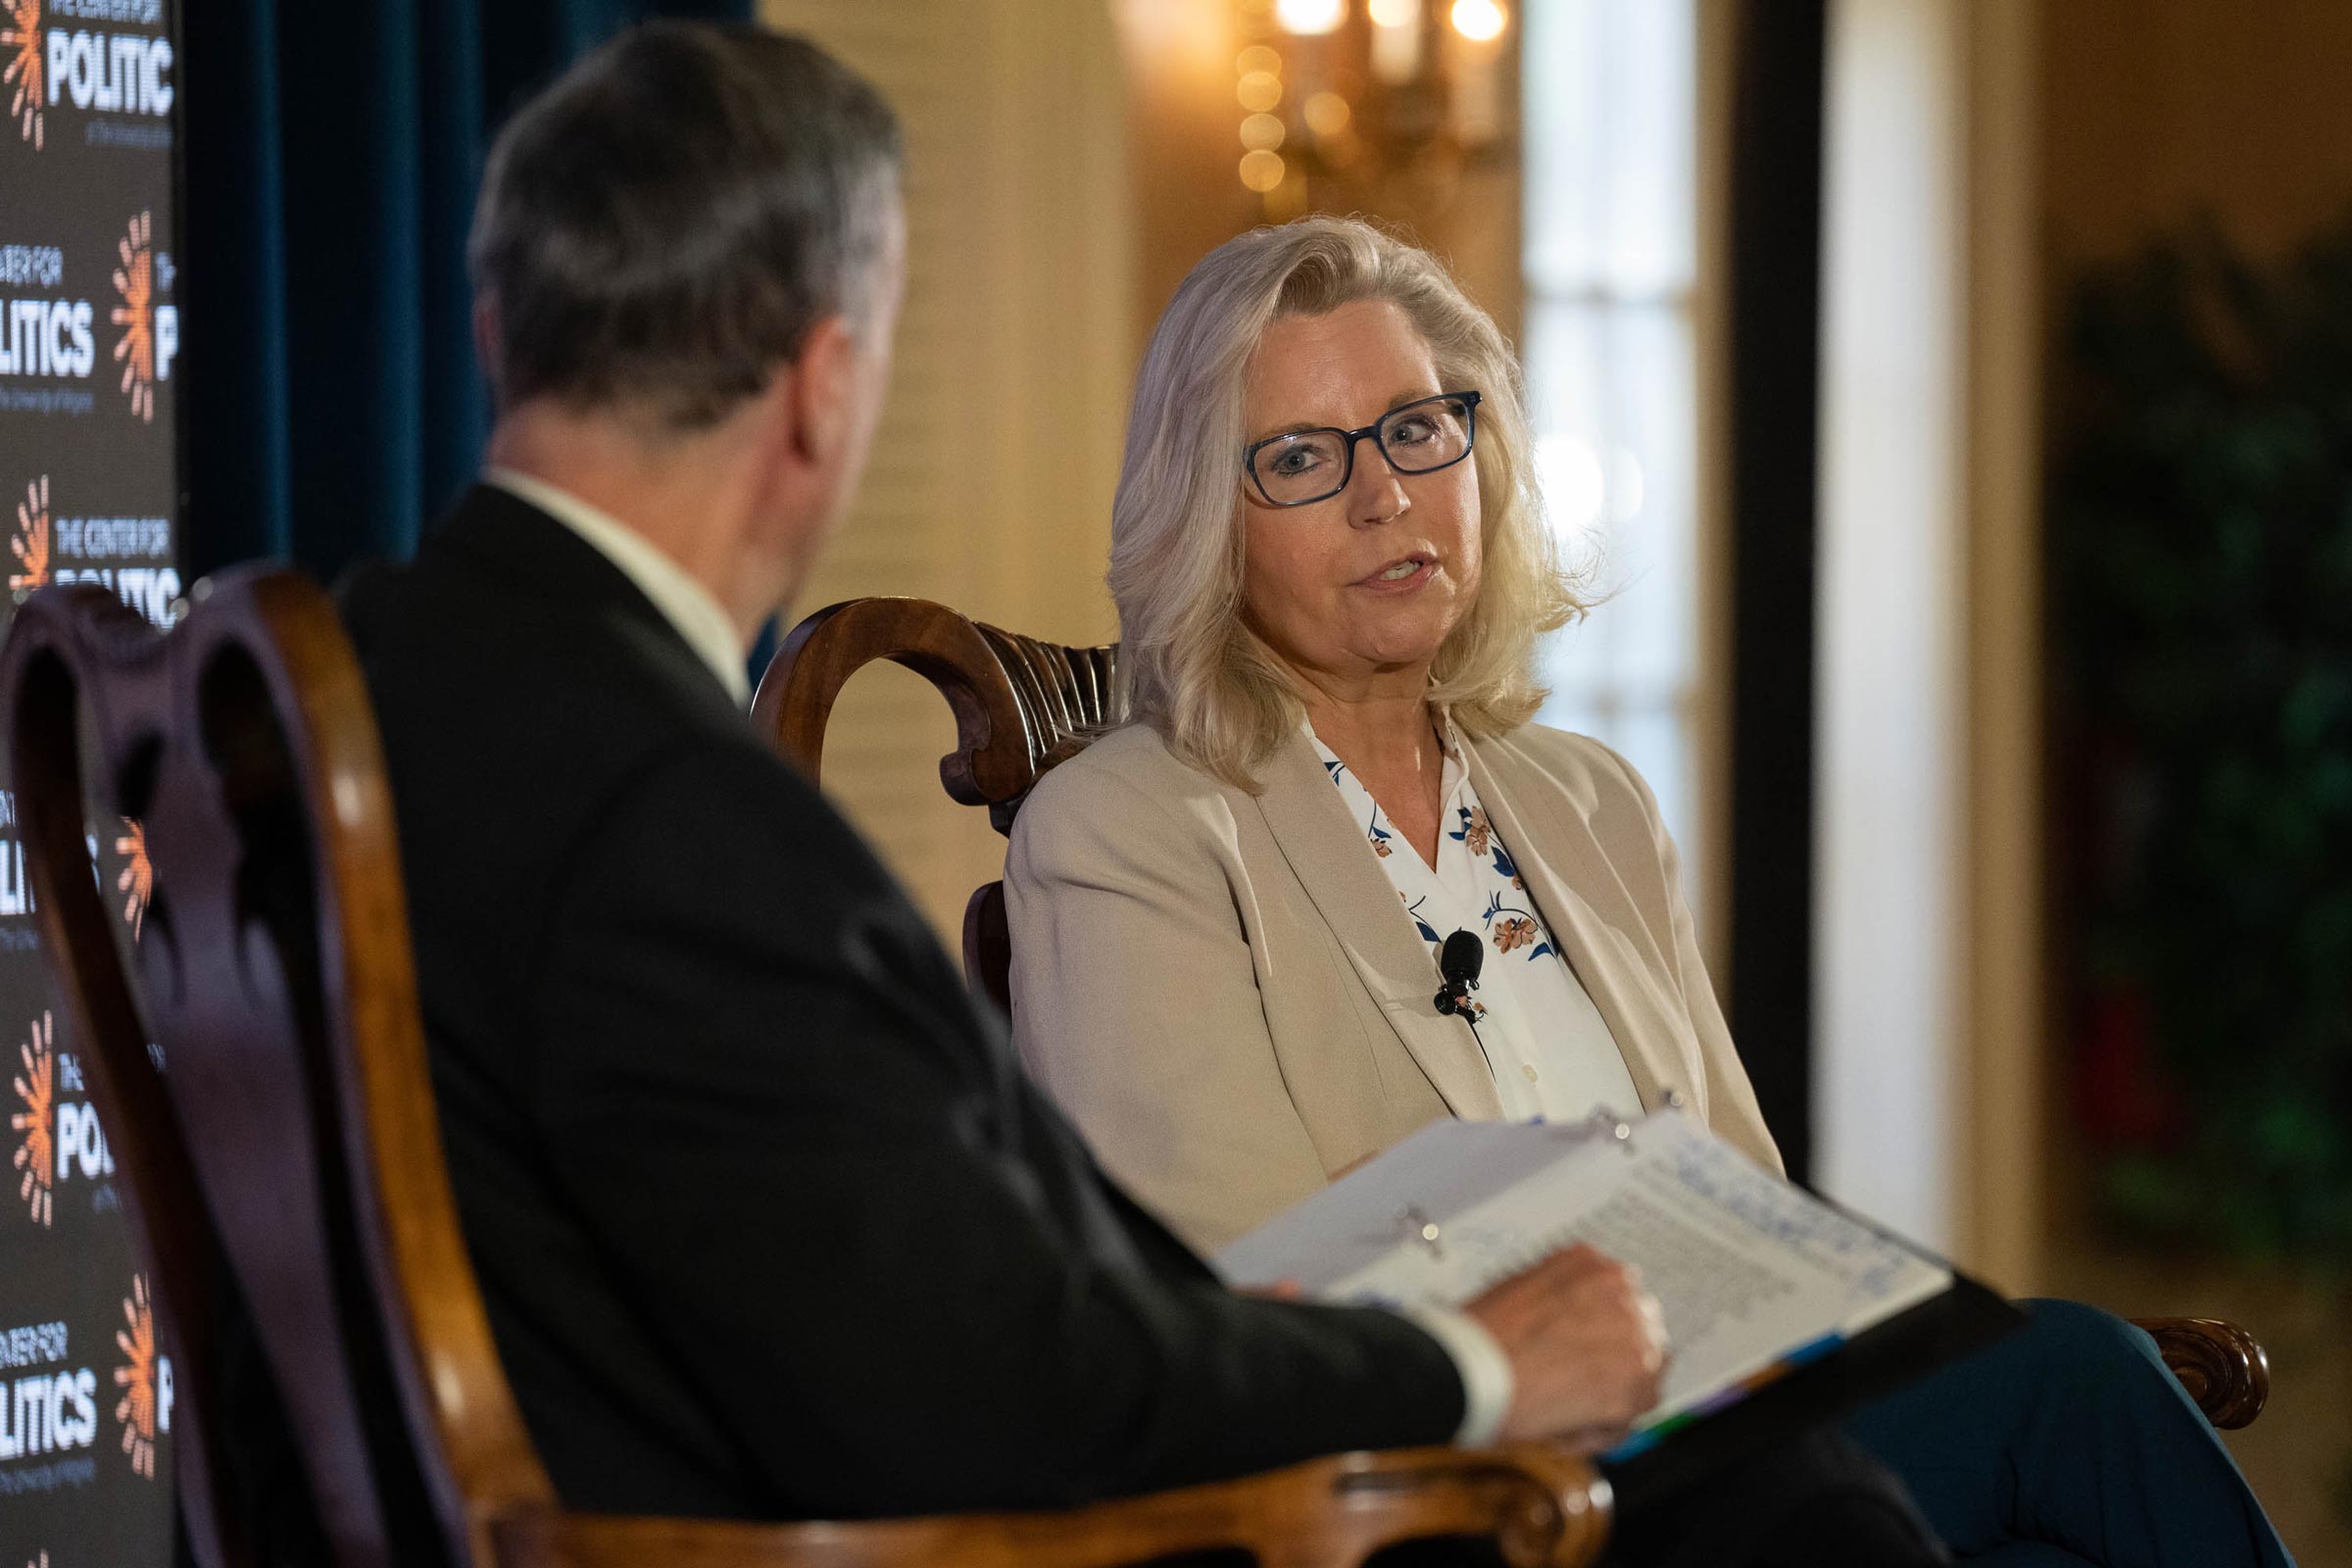 Liz Cheney in discussion with Larry Sabato